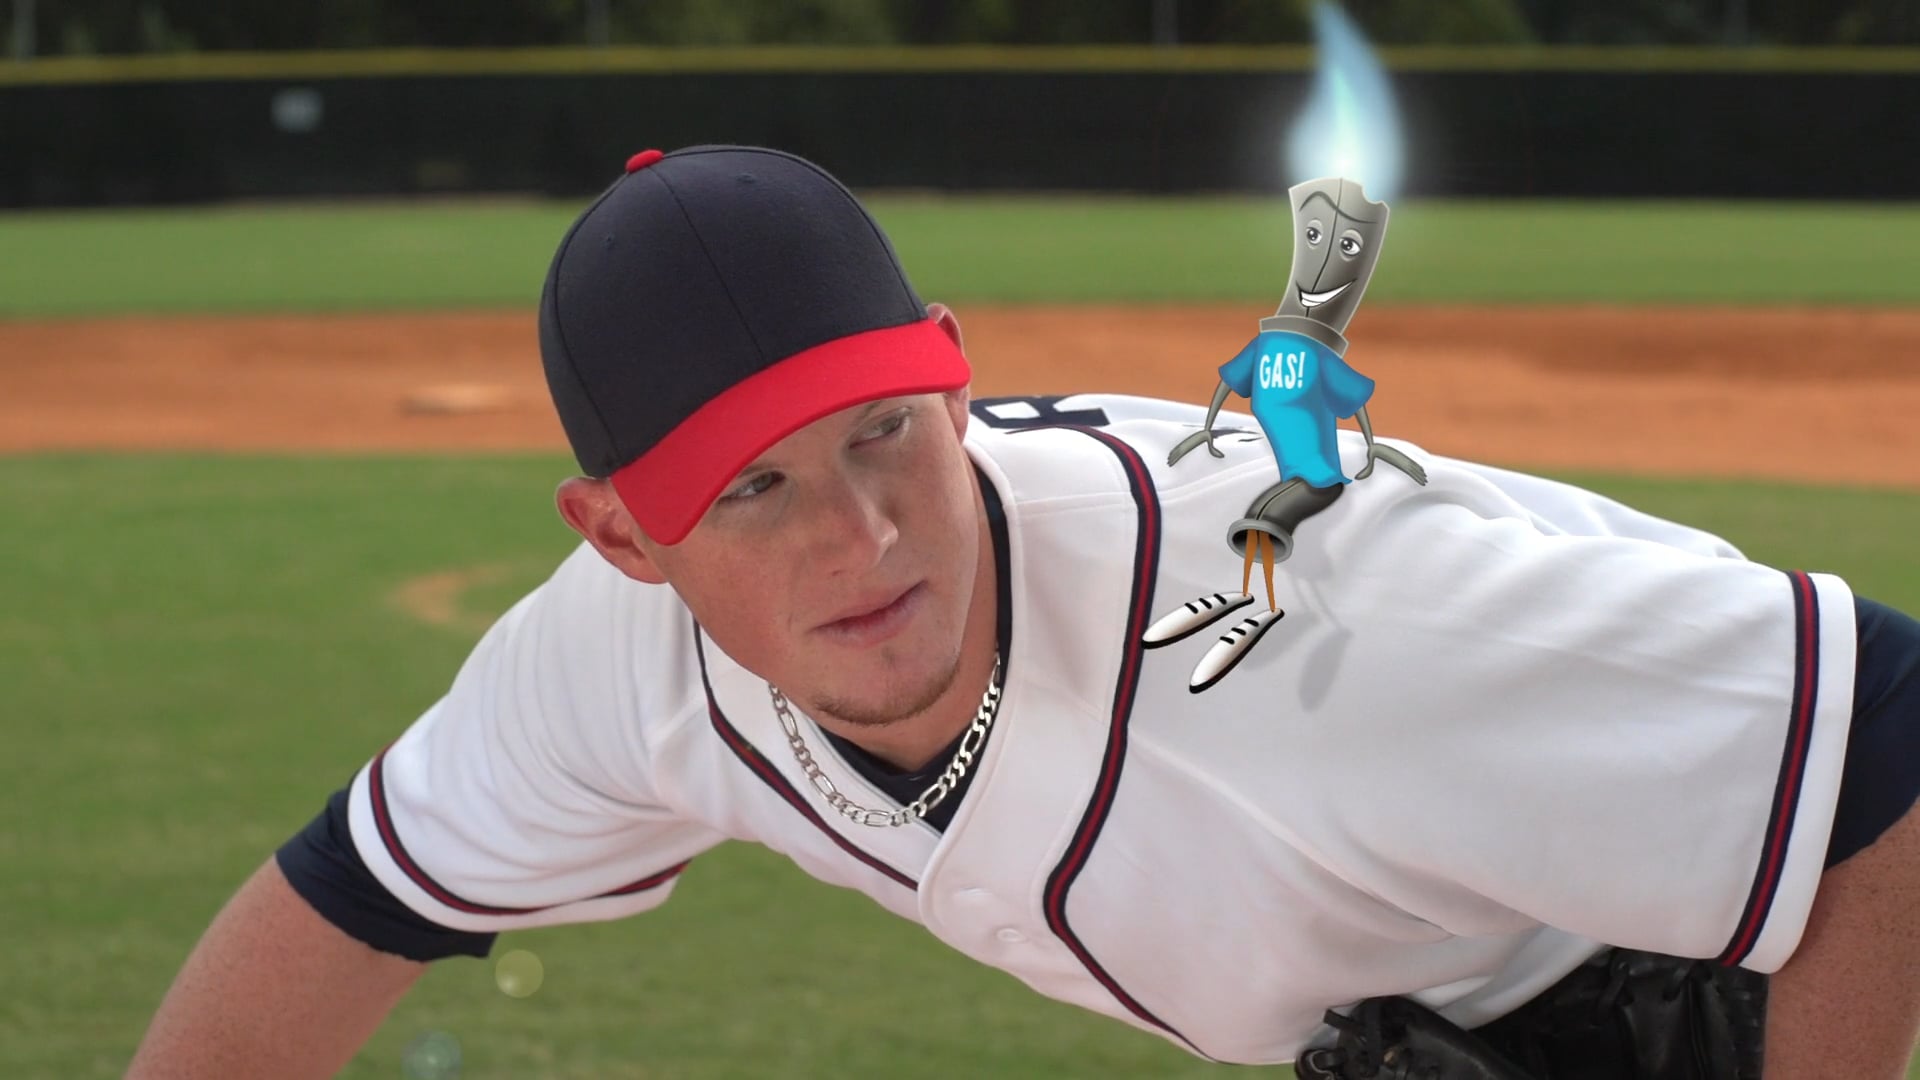 Infinite Energy: Craig Kimbrel :30 spot (2011) Directed and lensed by Jose A. Acosta for Dave Francombe.